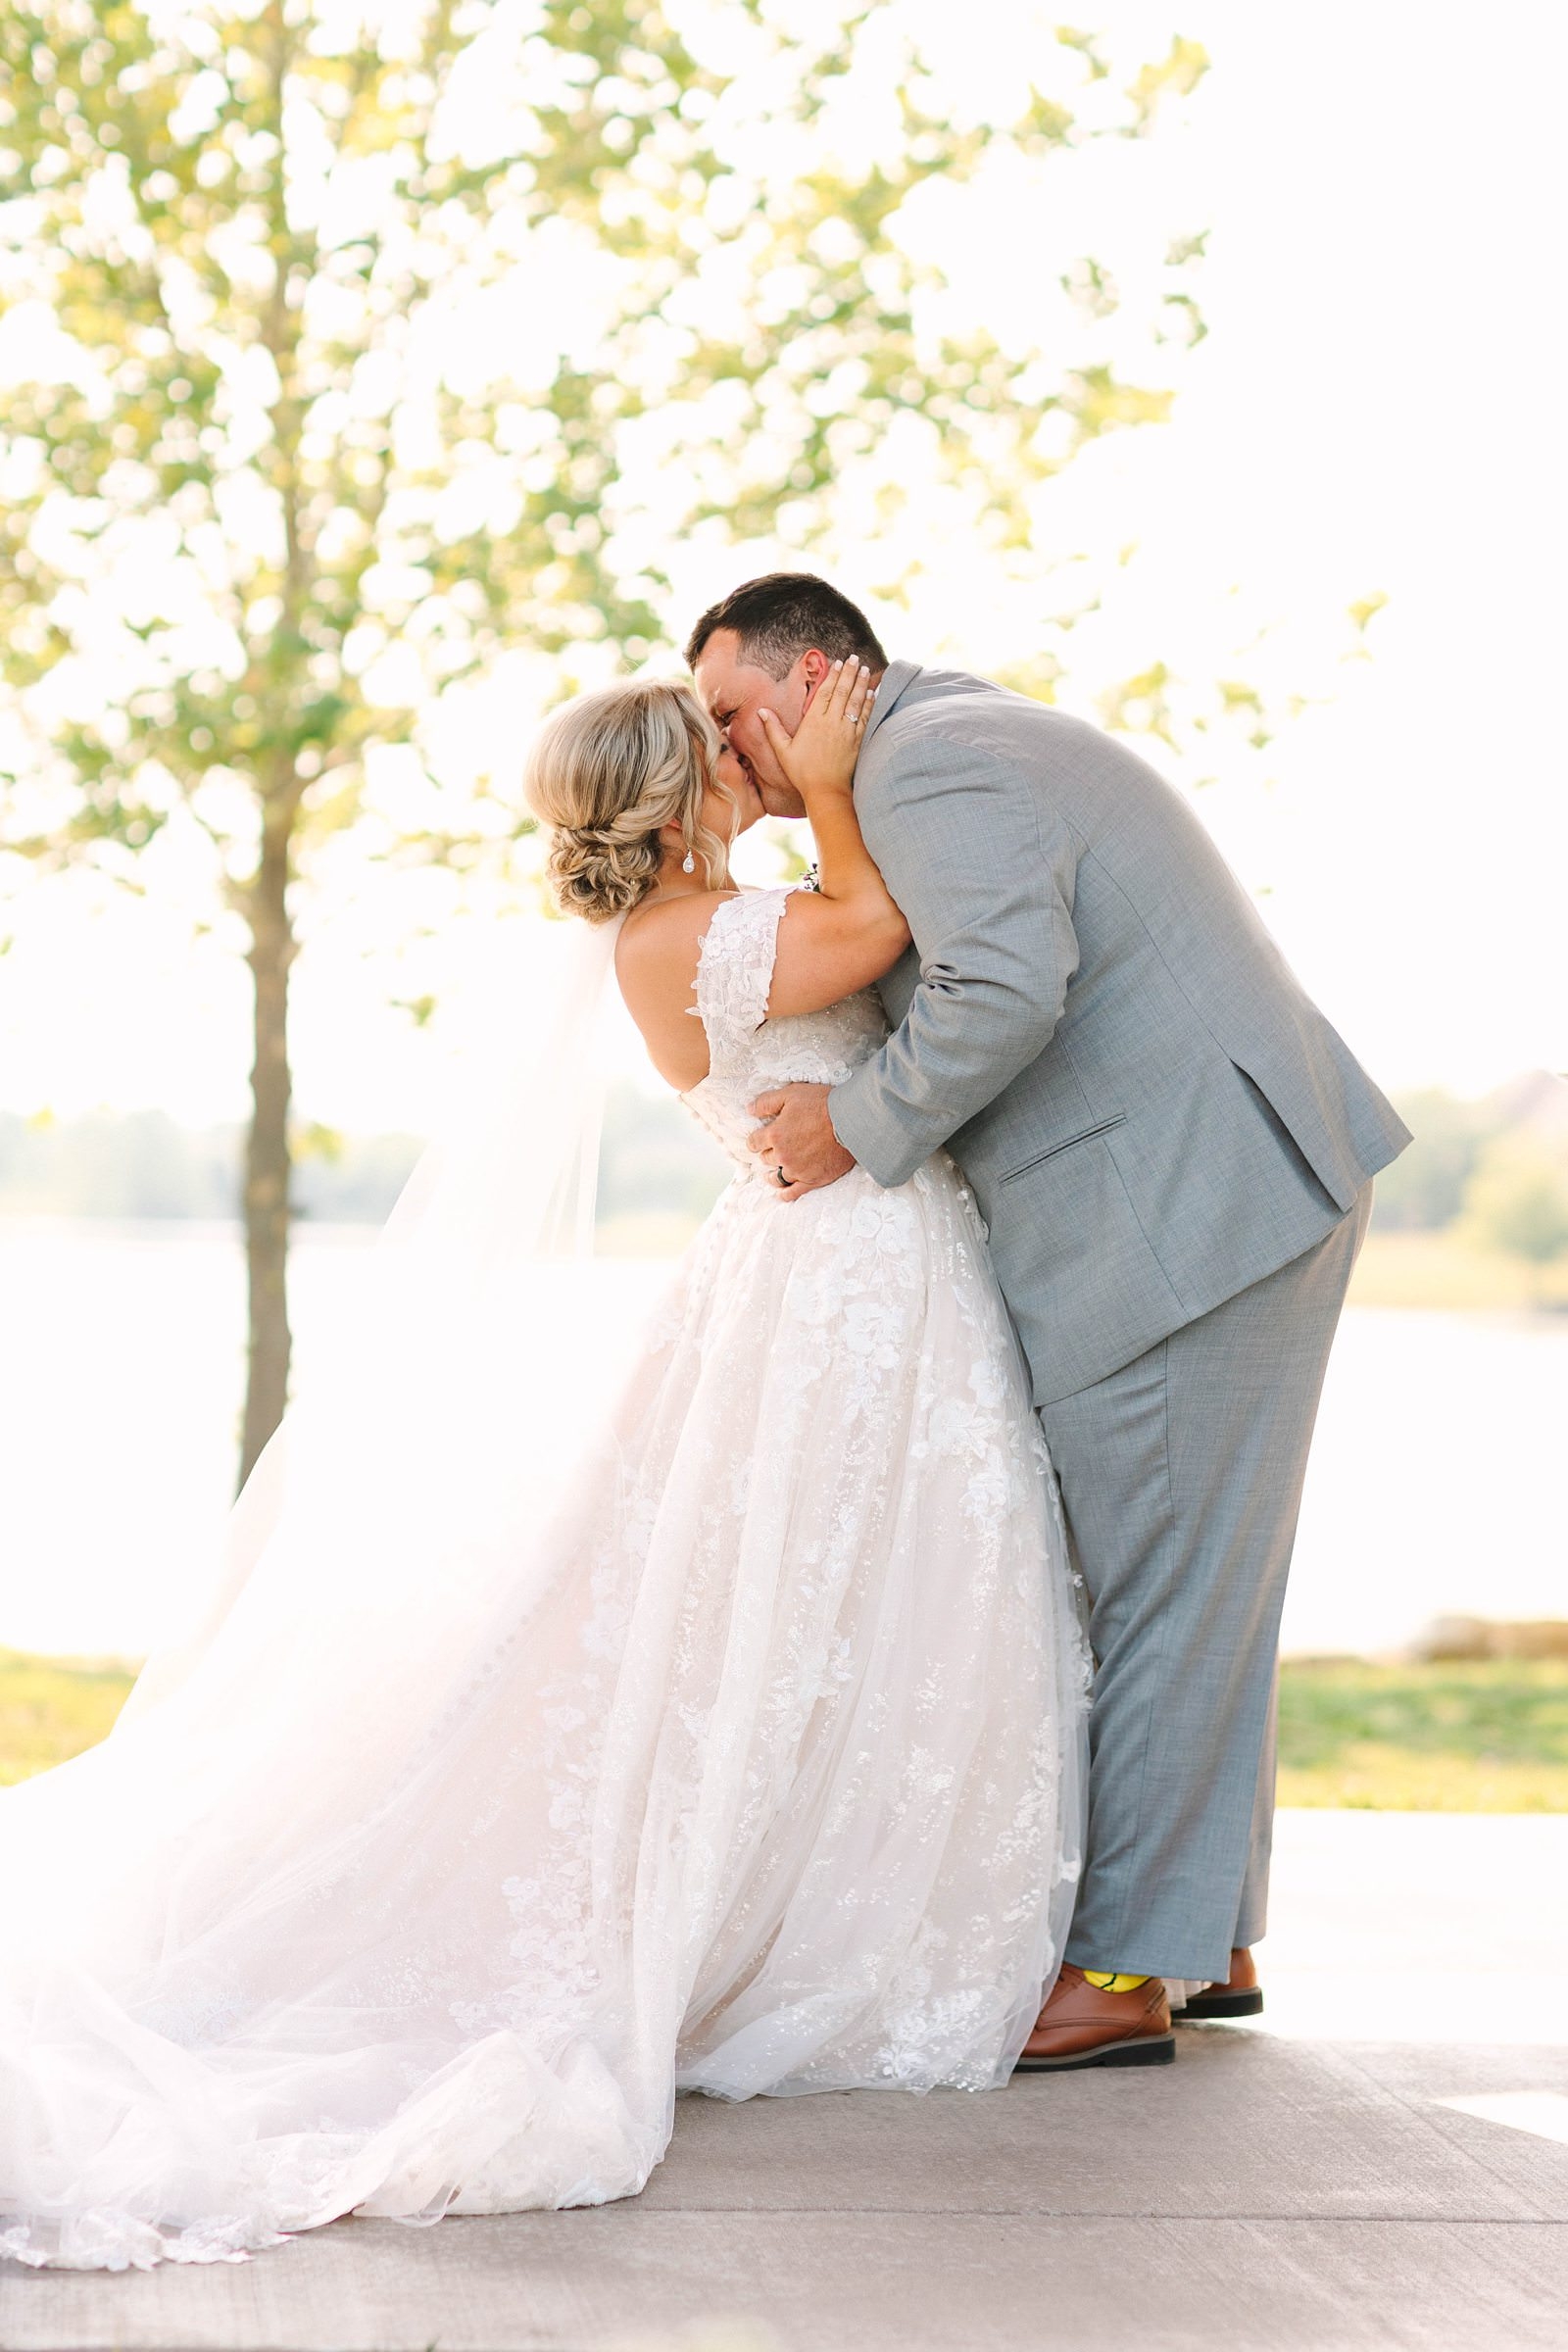 A Sunny Summer Wedding at Friedman Park in Newburgh Indiana | Paige and Dylan | Bret and Brandie Photography135.jpg